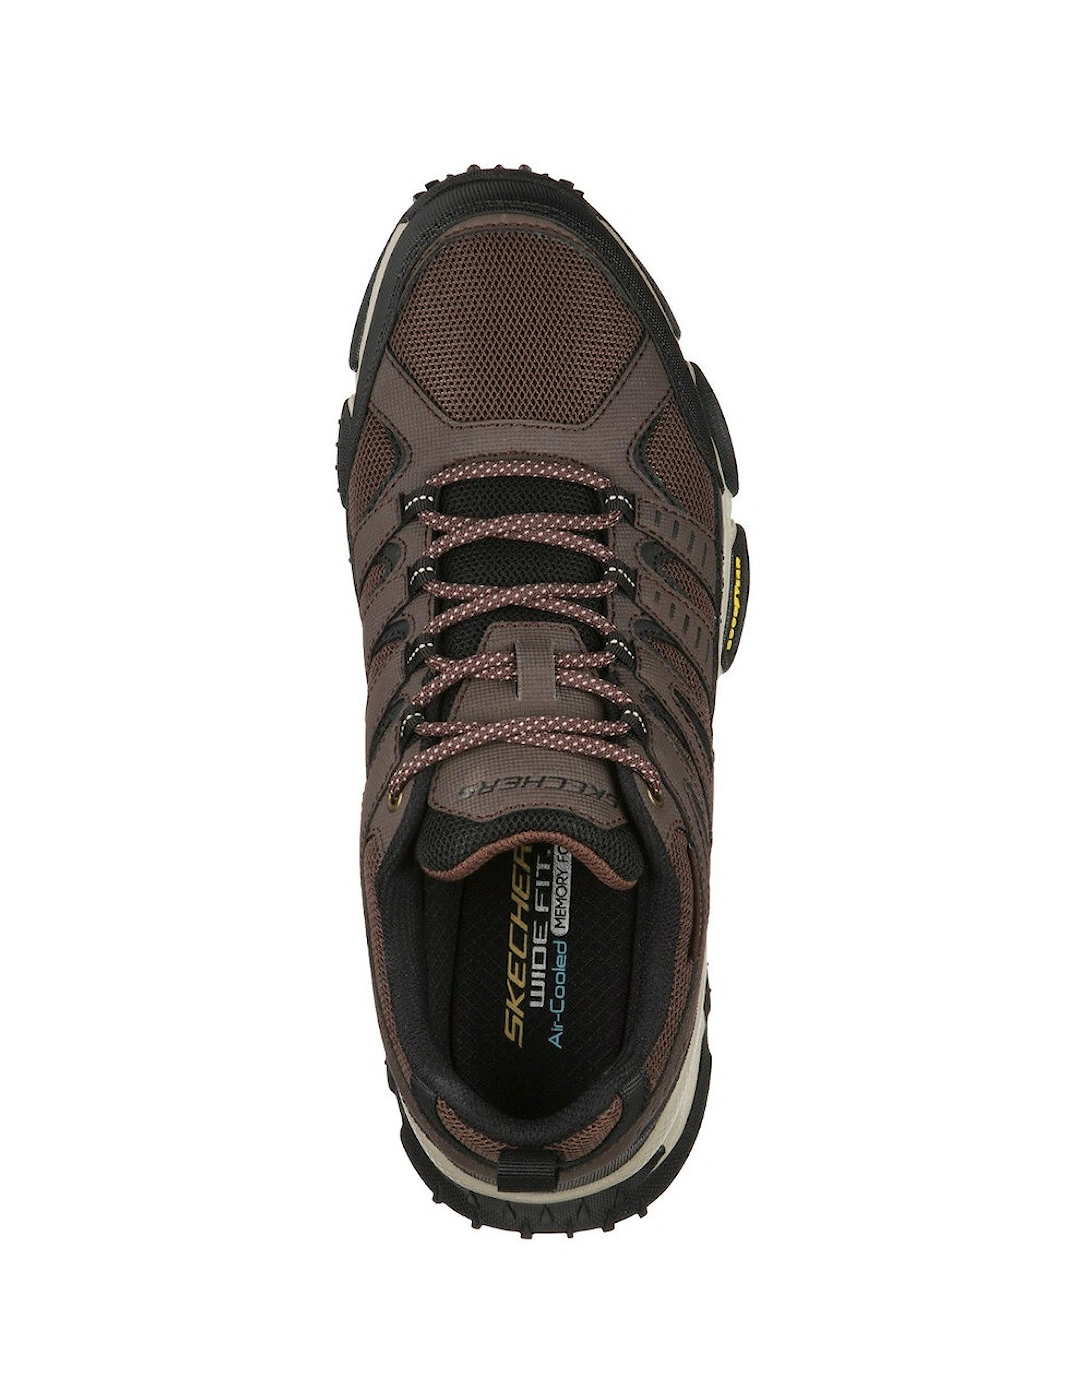 Mens Skech Air Envoy Lace Up Trainers Shoes